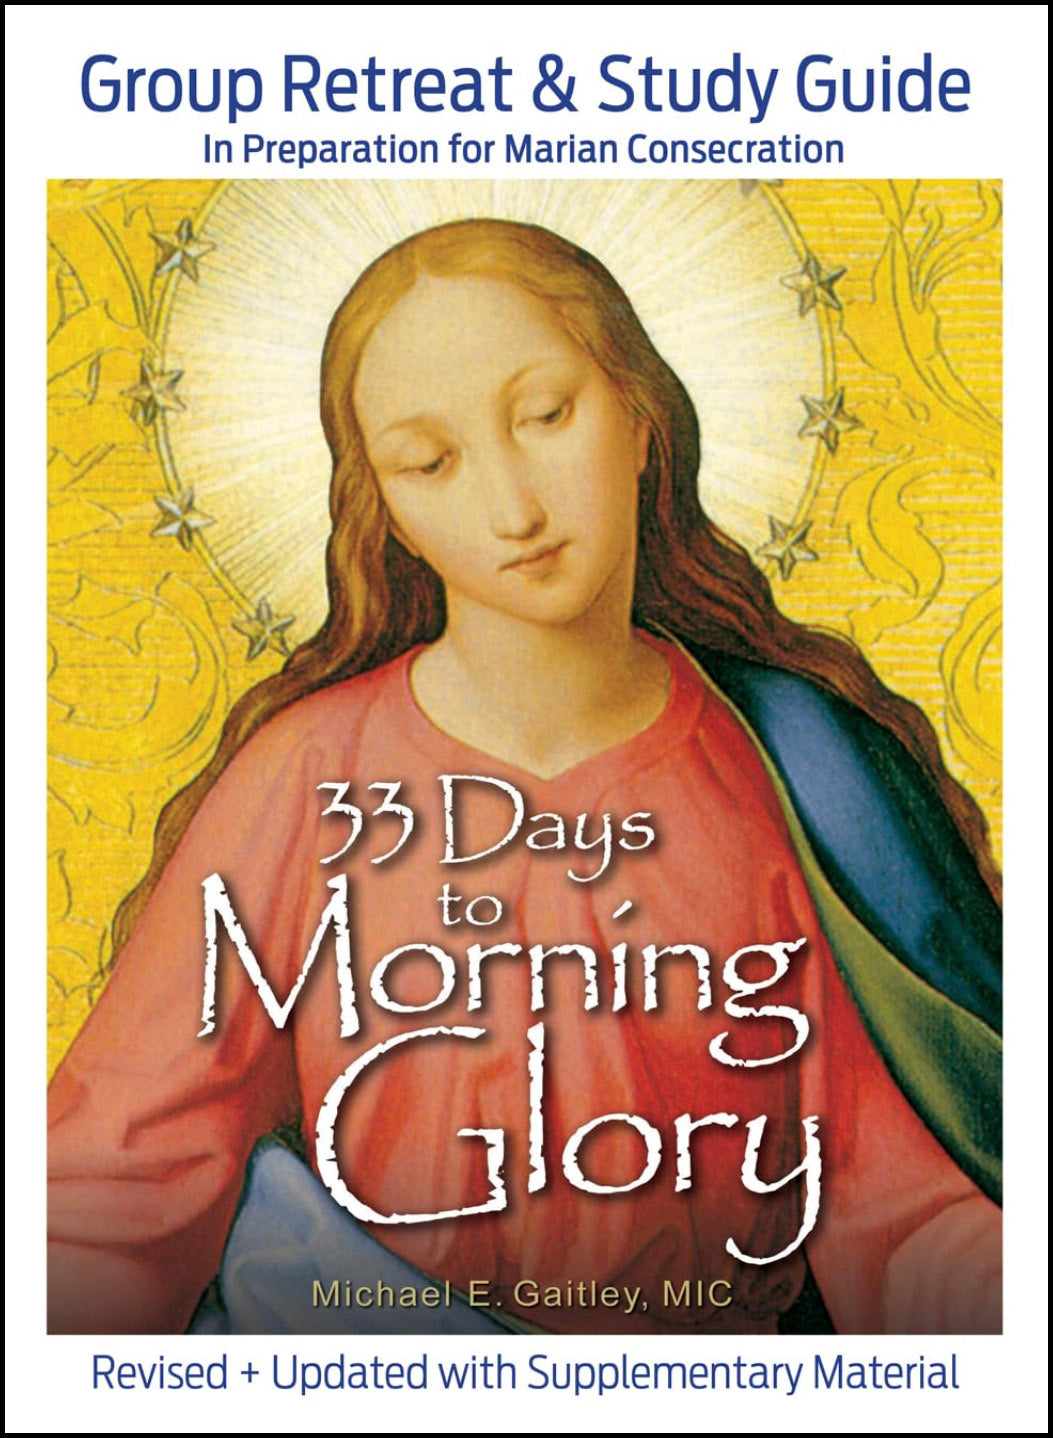 33 Days to Morning Glory - Group Retreat & Study Guide